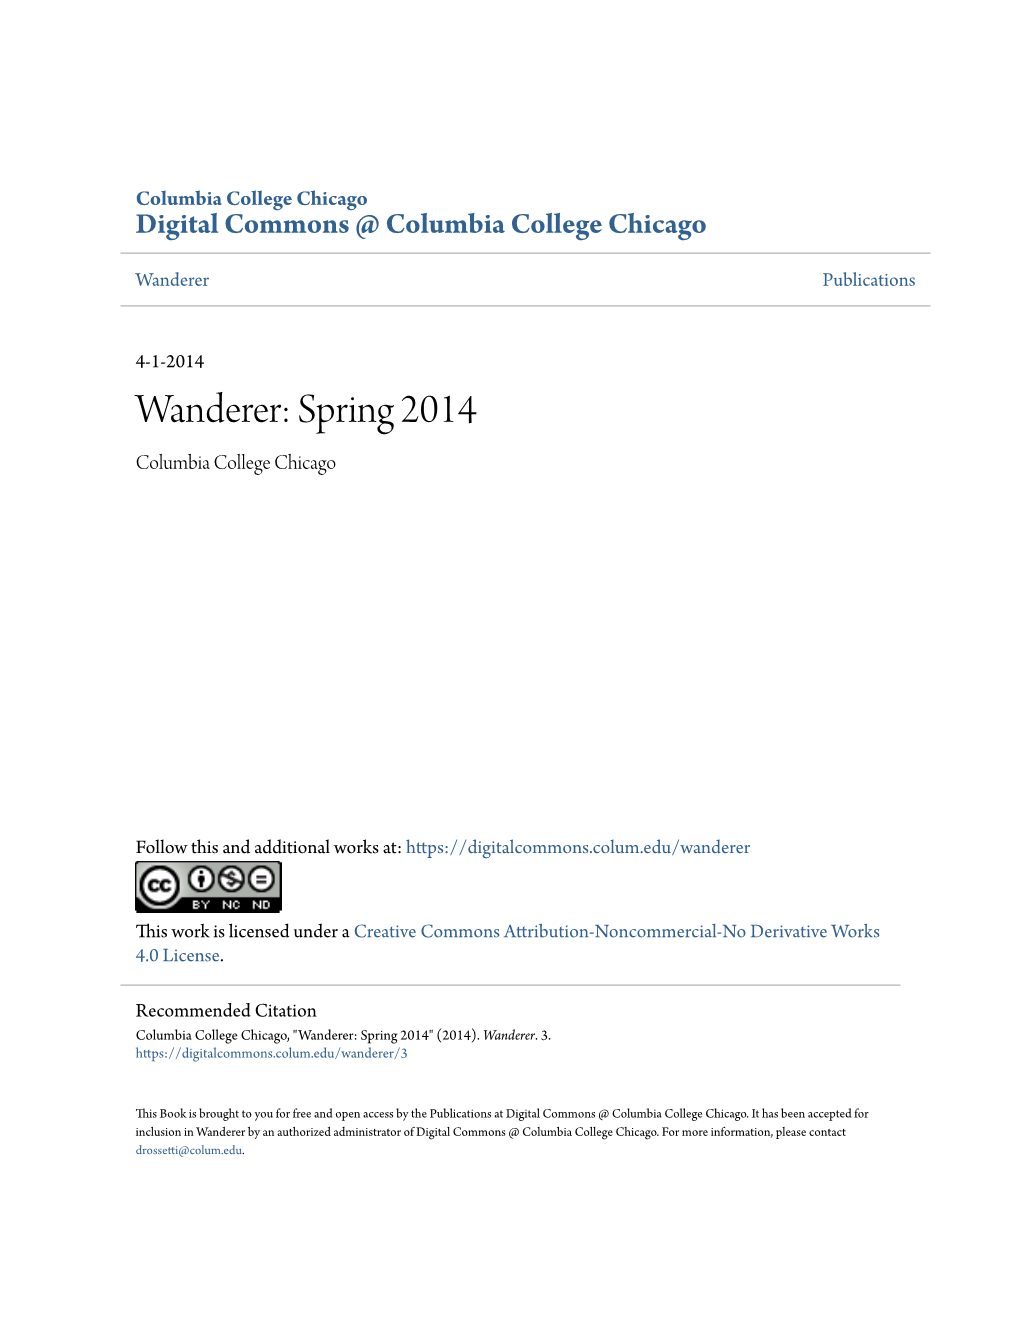 Wanderer: Spring 2014 Columbia College Chicago